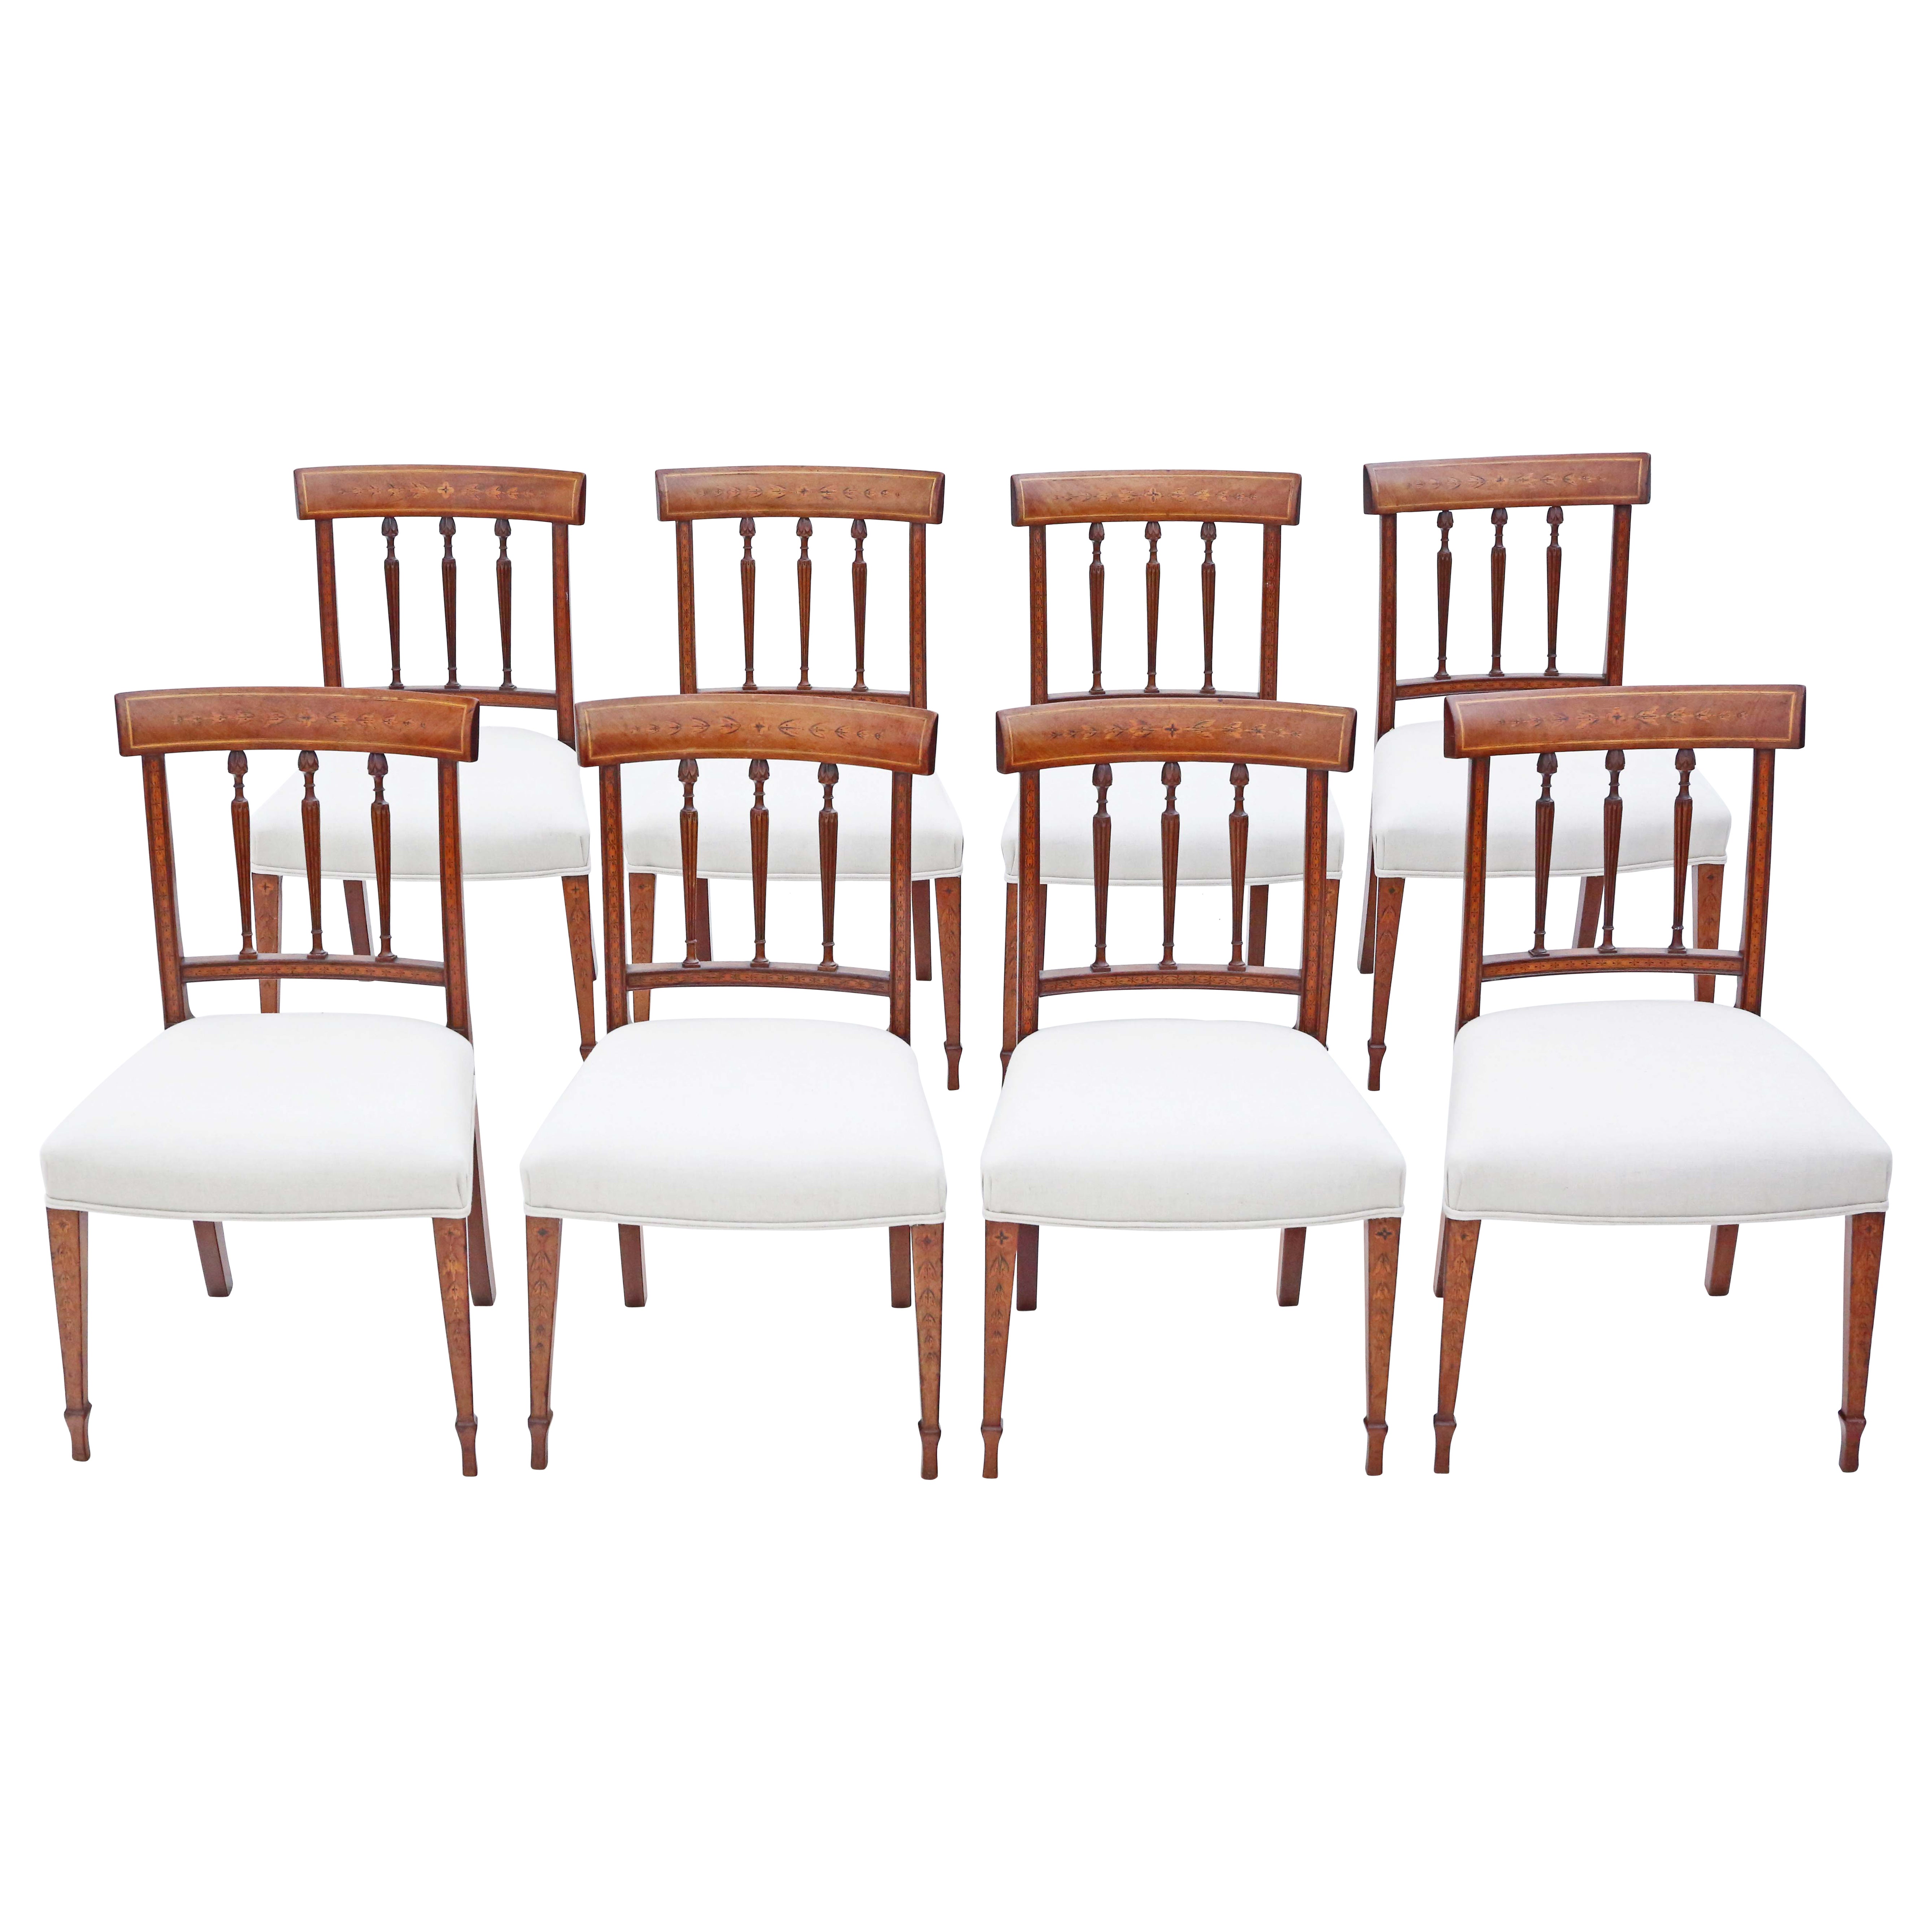 Antique fine quality set of 8 mahogany marquetry dining chairs early 19th Centur